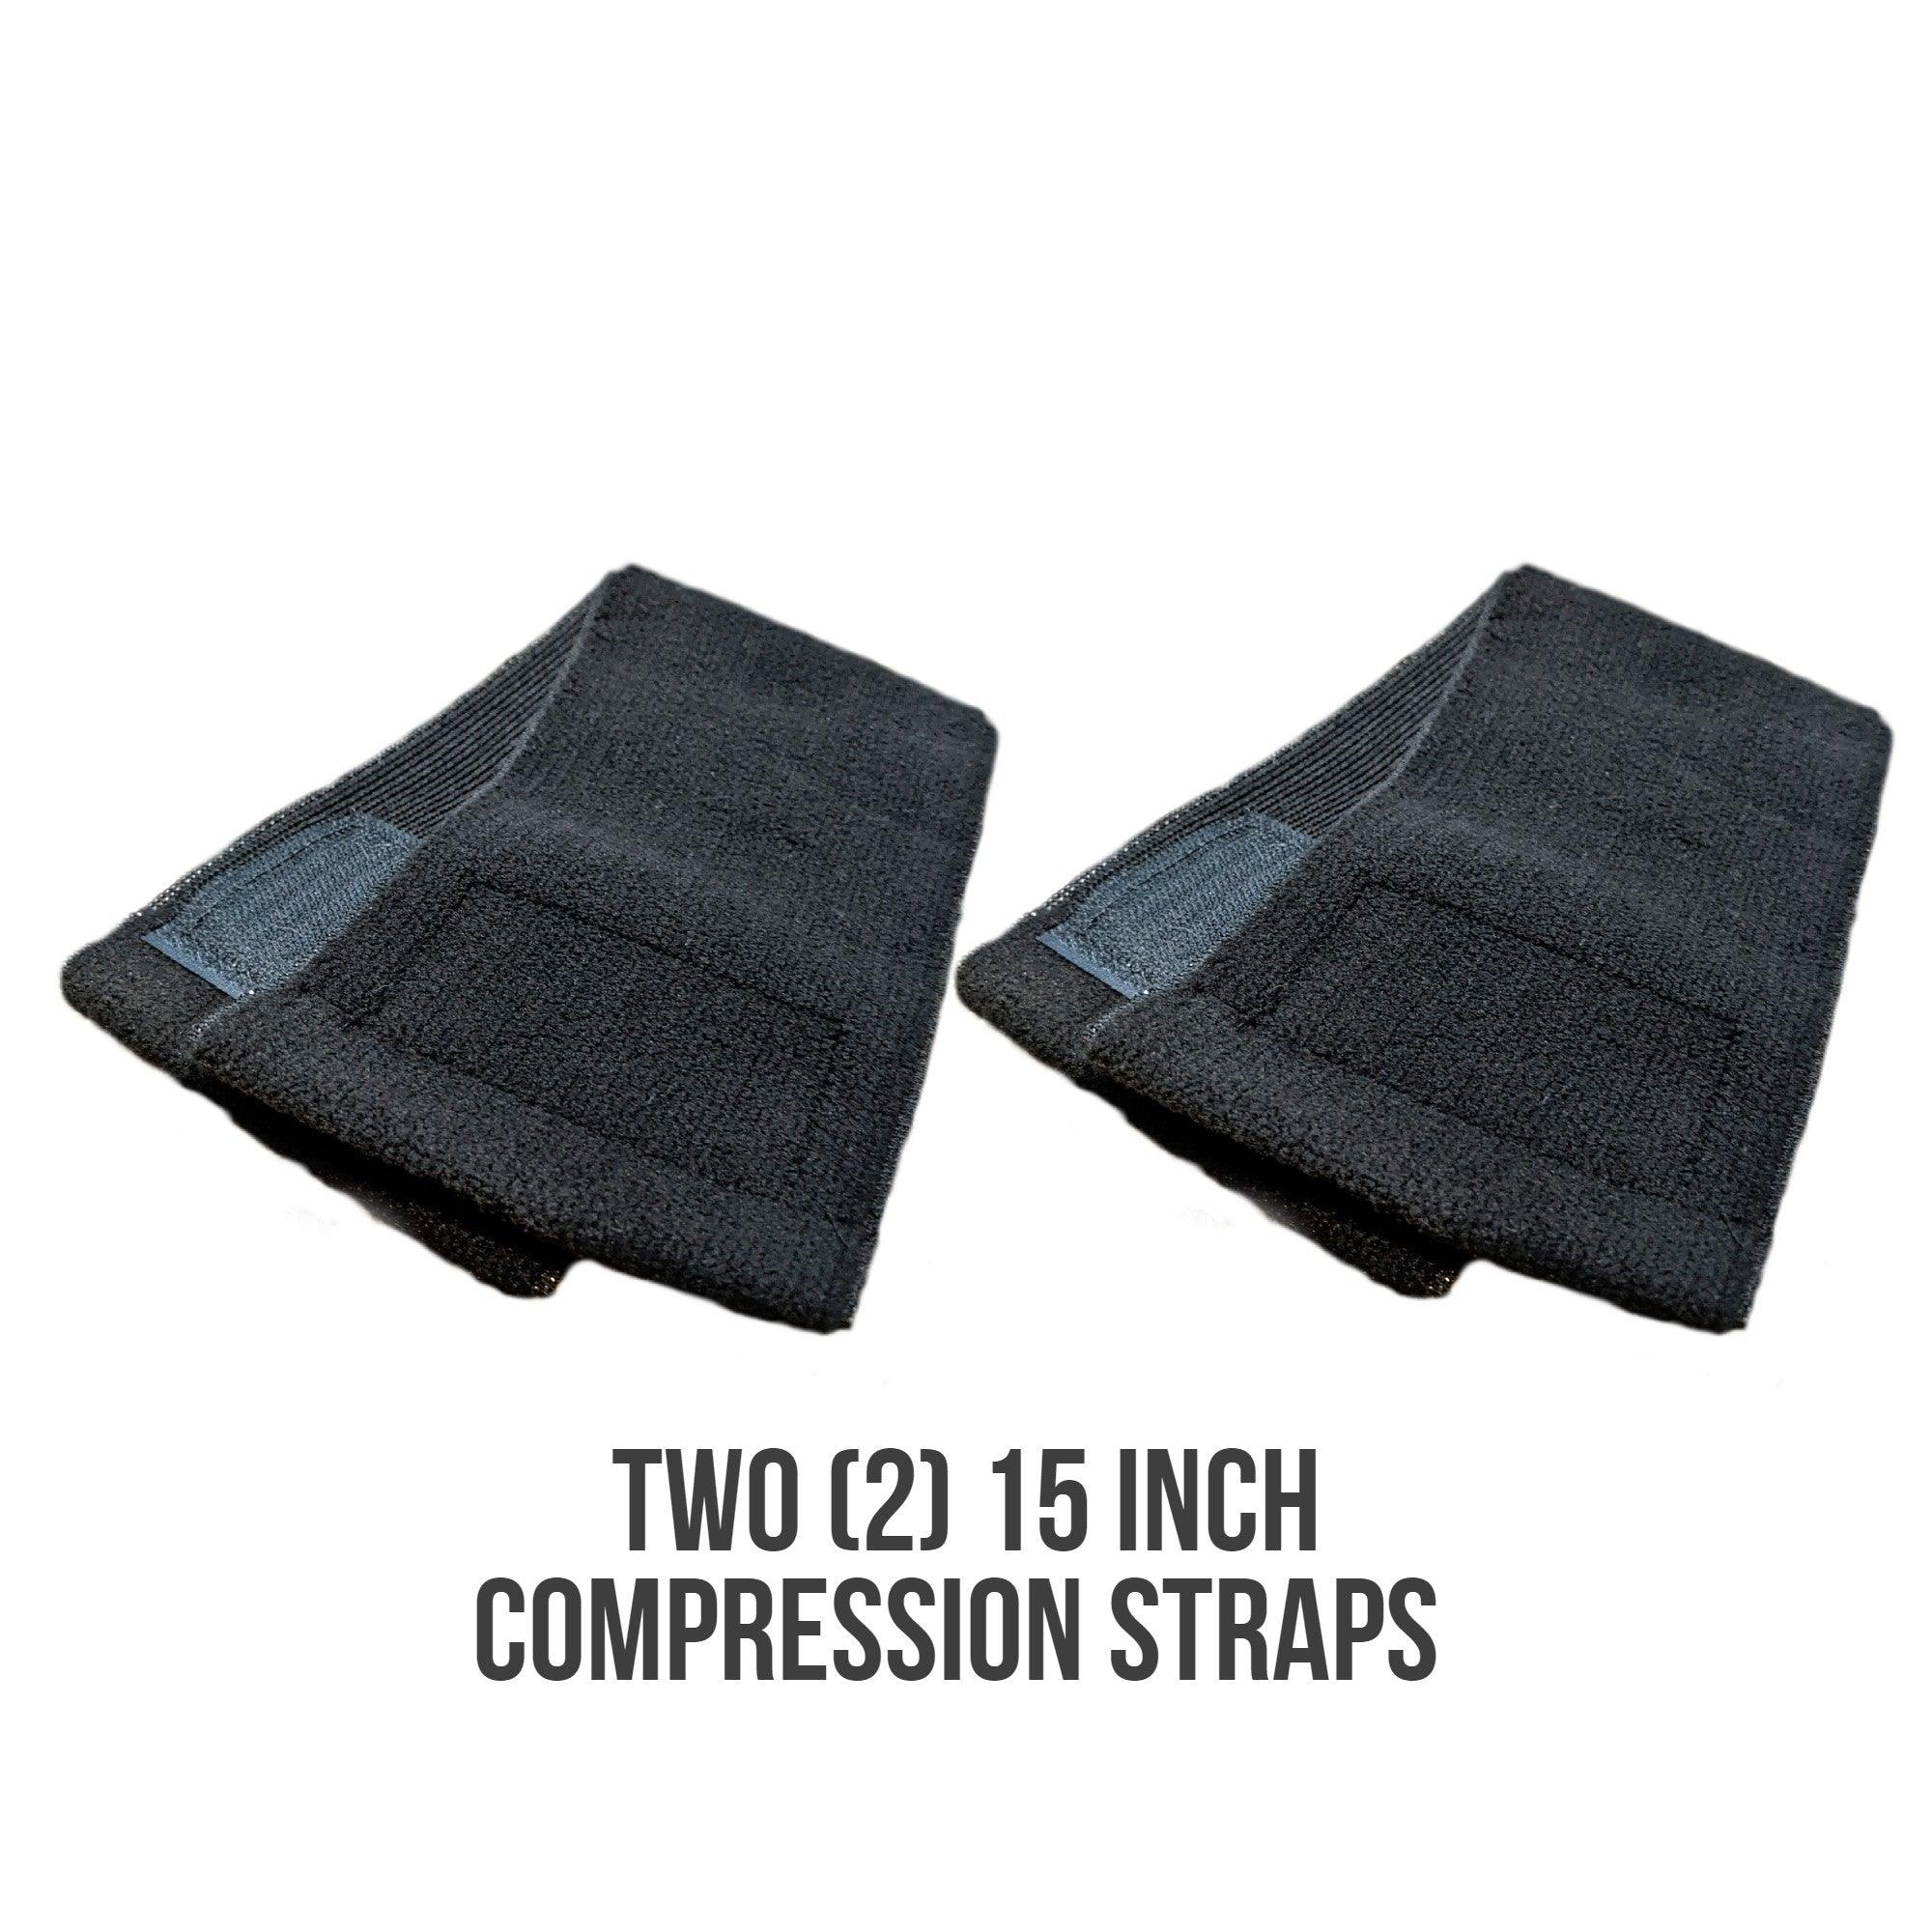 Omni Ice Premium Cold Therapy Compression Straps - CCS15-2 Omni Ice Premium Cold Therapy Compression Straps - undefined by Supply Physical Therapy Accessories, Accessory, Aircast Accessories, Best Seller, Breg, Breg Accessories, Breg Wave Accessories, Classic3 Accessories, Clear3 Accessories, Compression Straps, DonJoy, Ossur, Replacement, Straps, Wraps